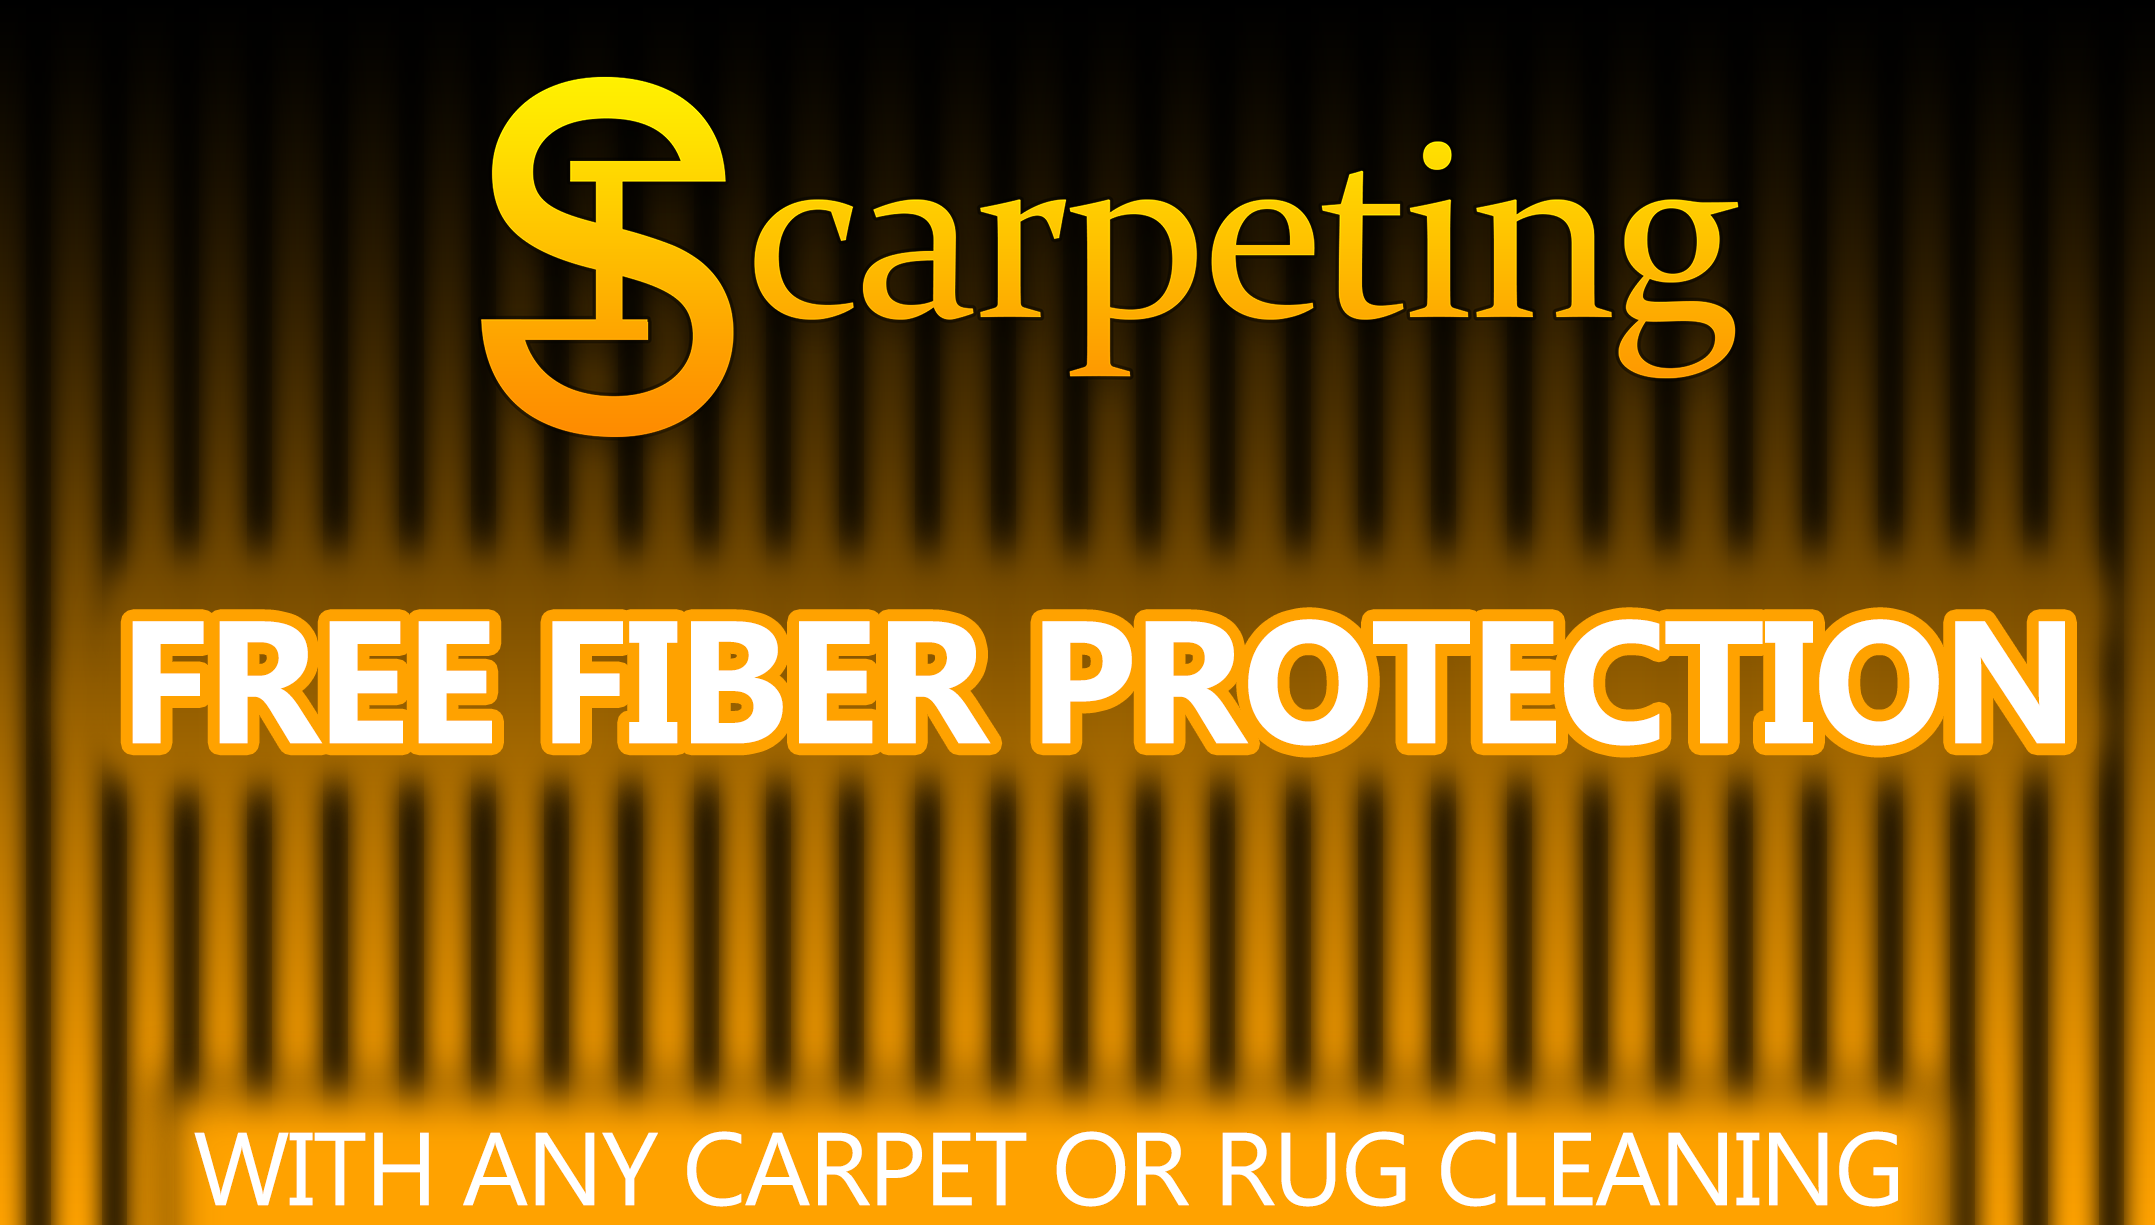 Free Fiber Protection Application With Any Carpet or Rug Cleaning